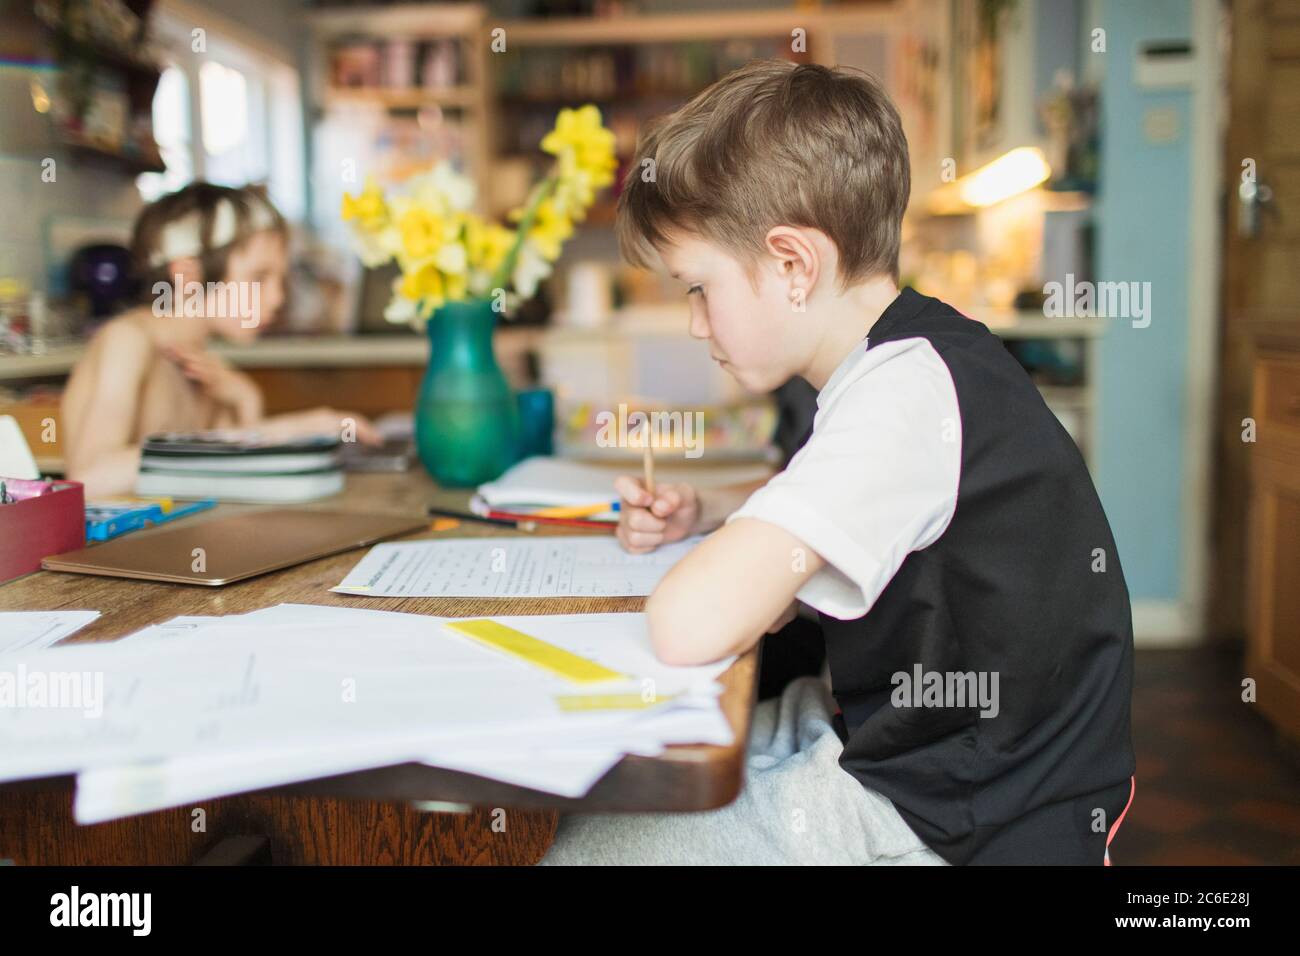 Focused boy homeschooling at dining table Stock Photo